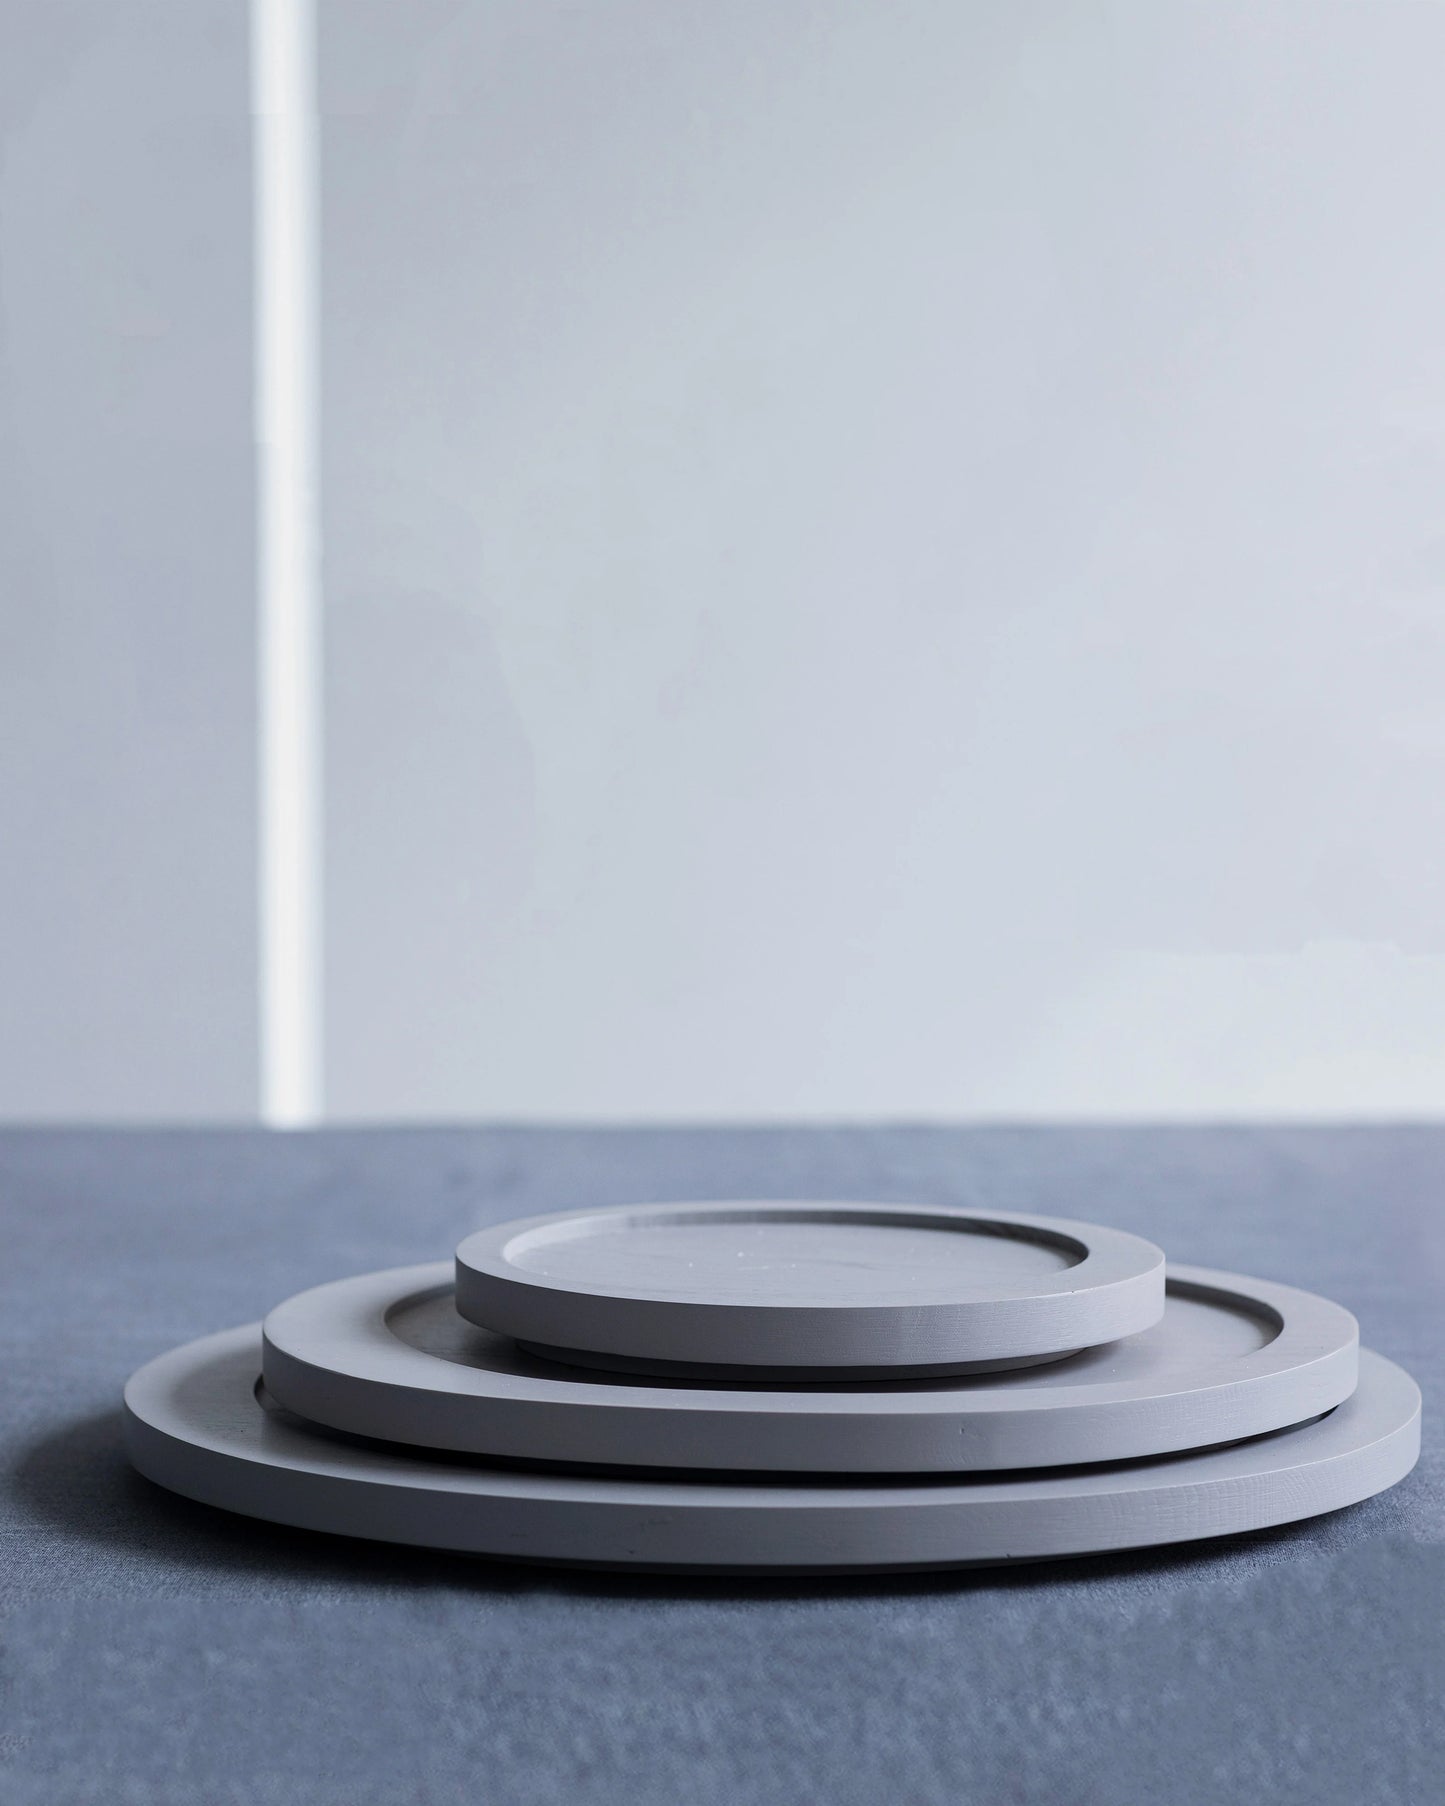 Valerie Objects Inner Circle Tray Large, light grey by Maarten Baas - $158.00